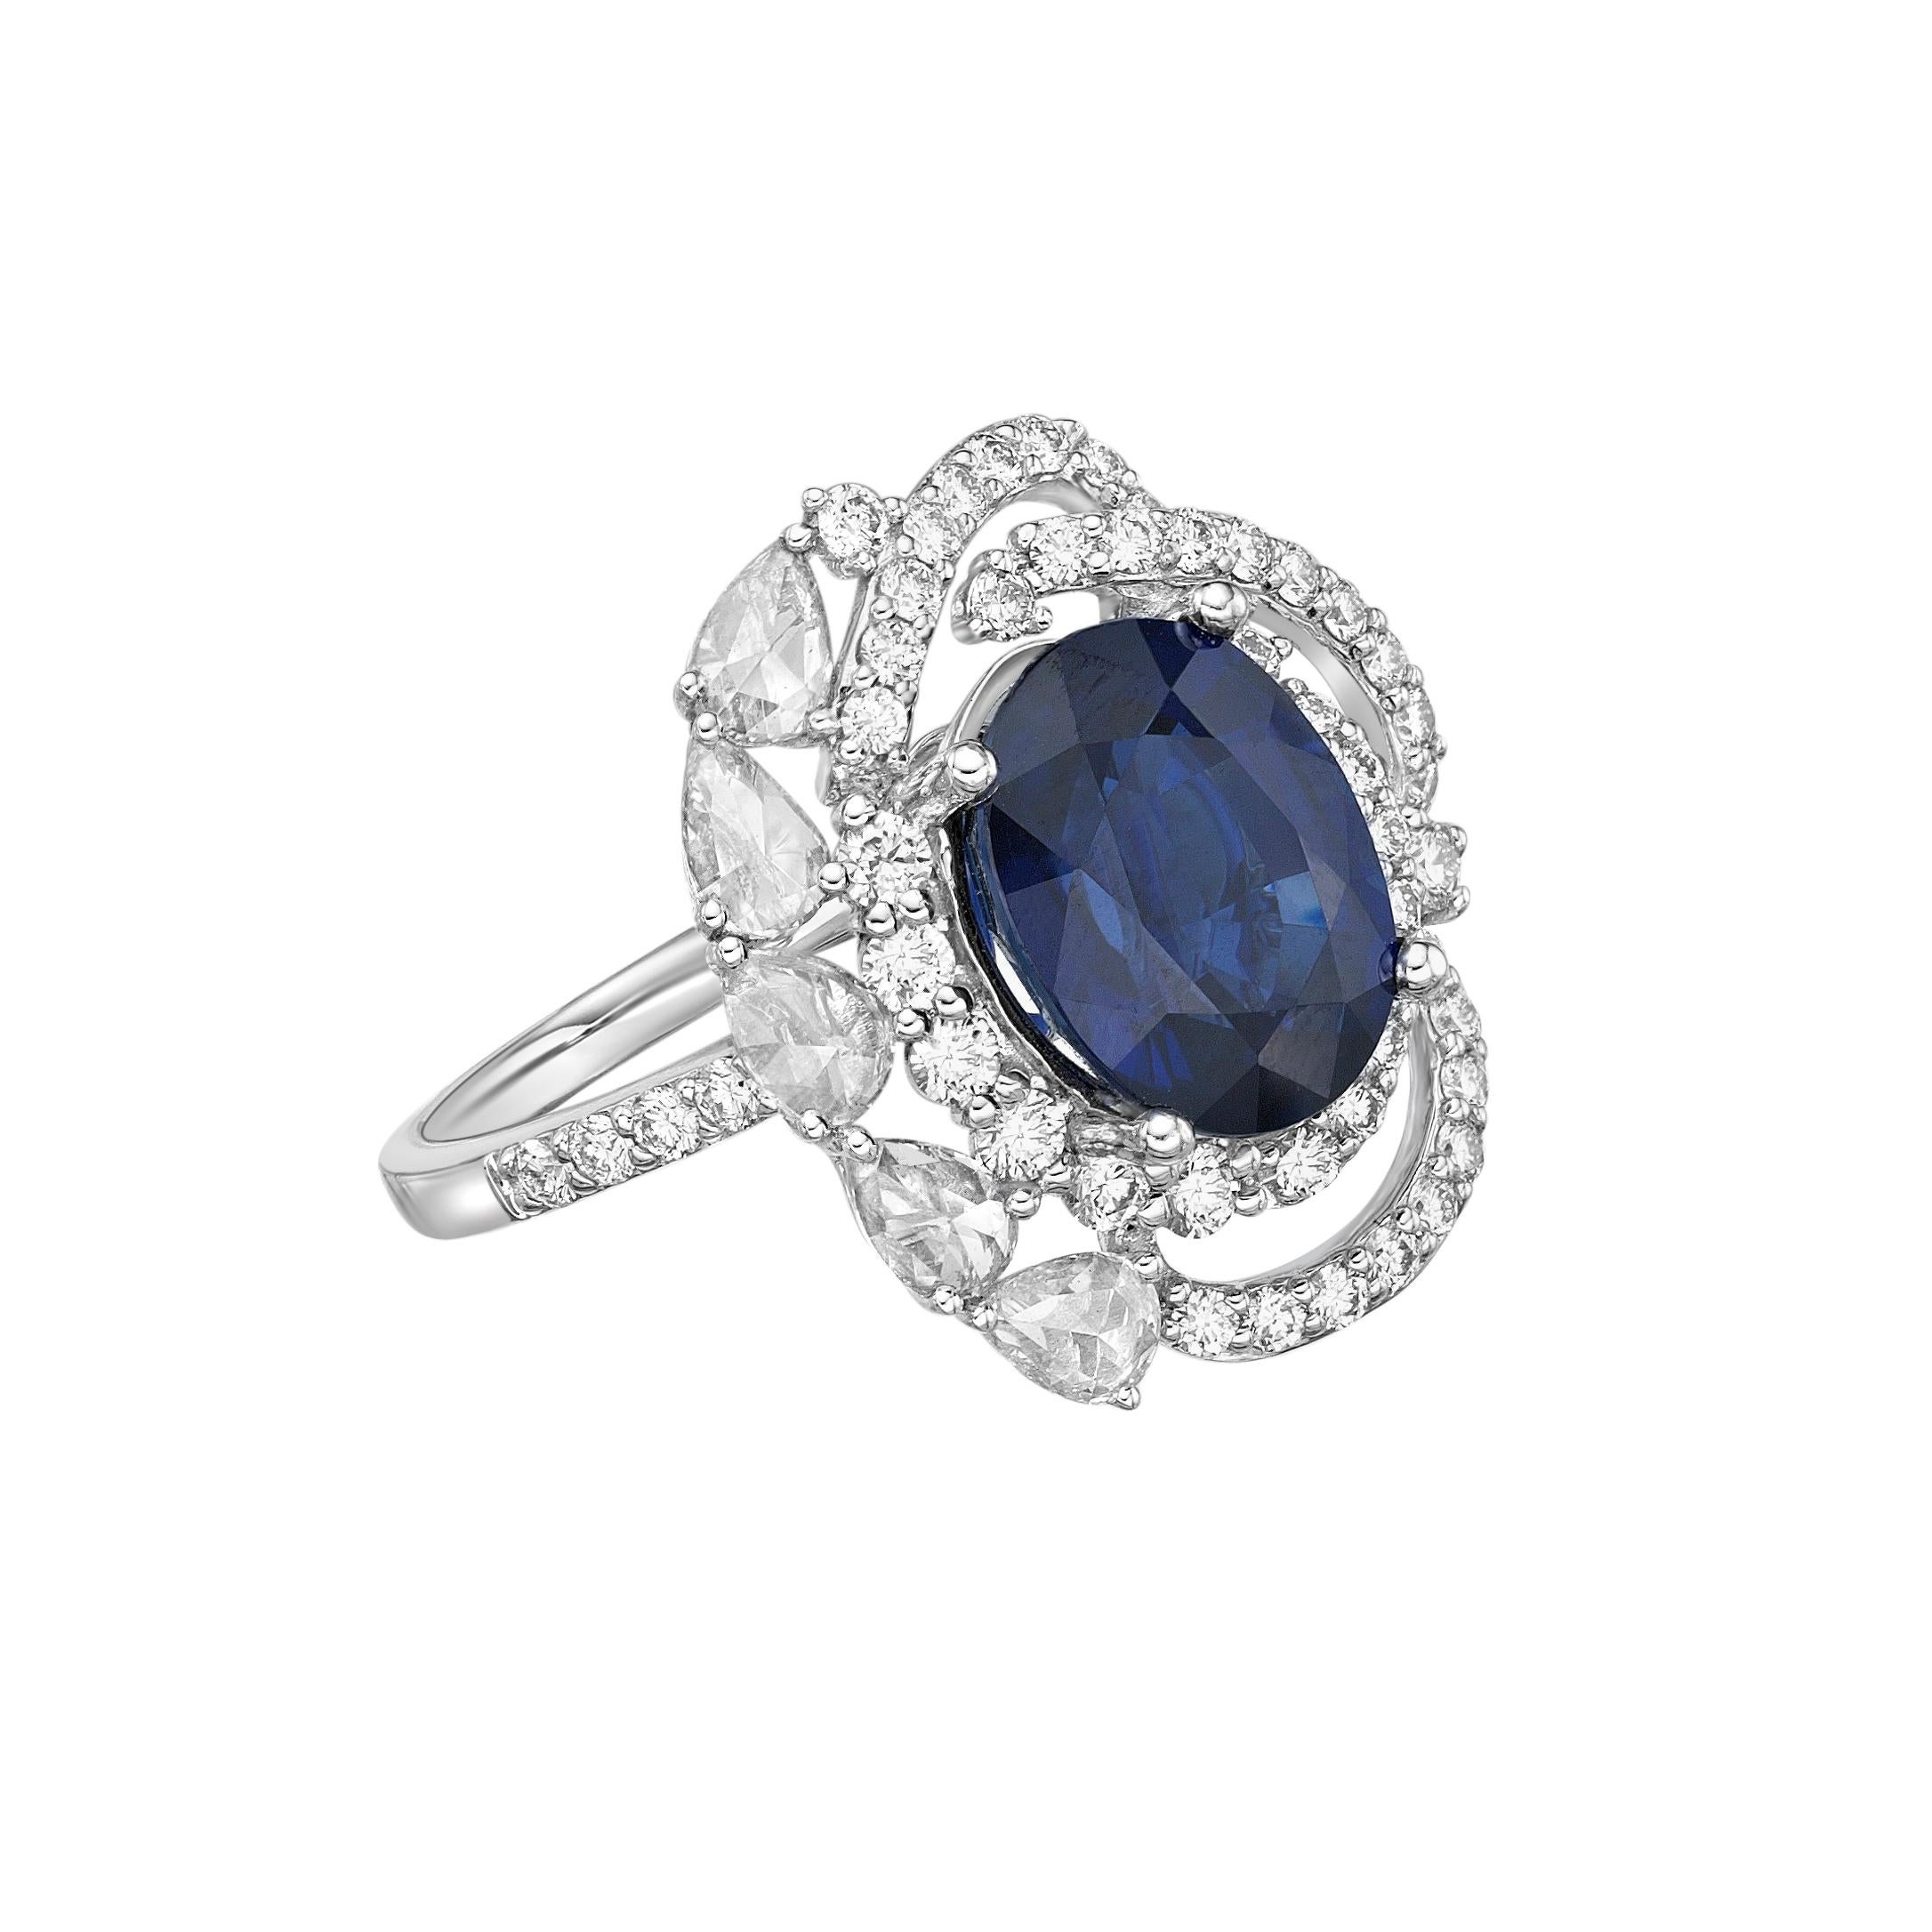 Contemporary GRS Certified 5.89 Carat Vivid Blue Sapphire & Diamond Ring in 18K White Gold For Sale